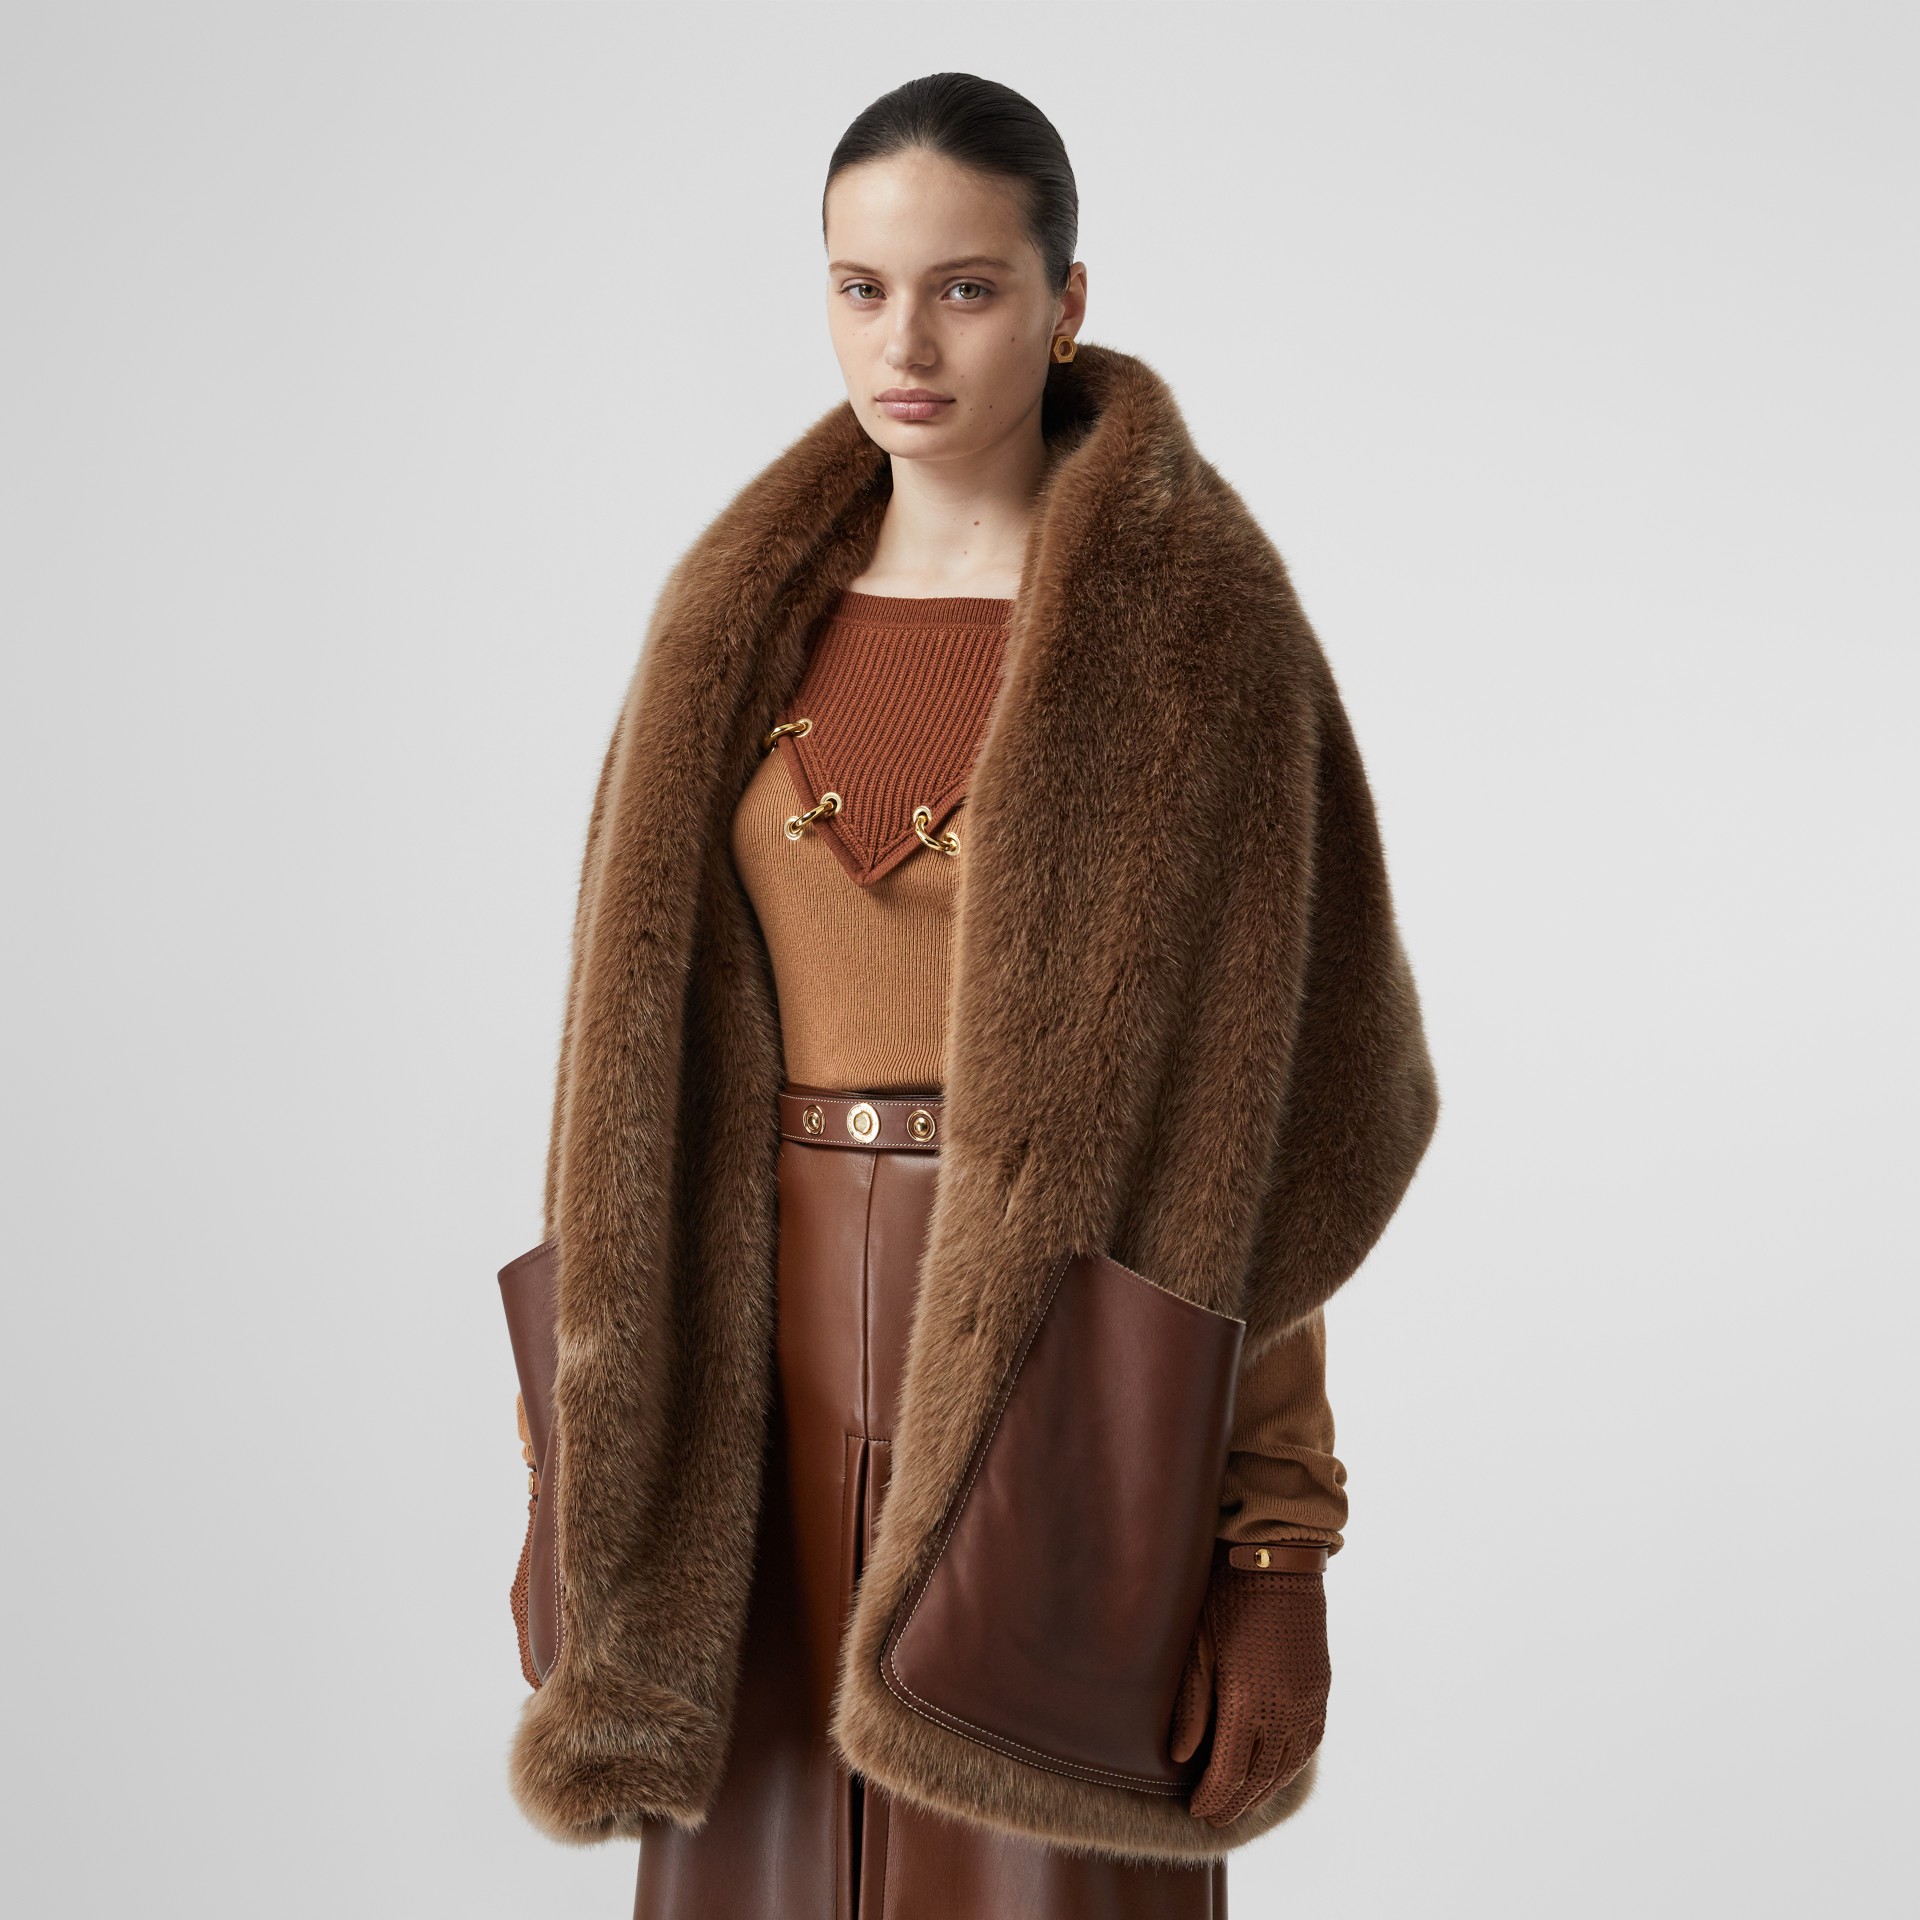 Faux Fur and Cashmere Stole in Camel - Women | Burberry United States